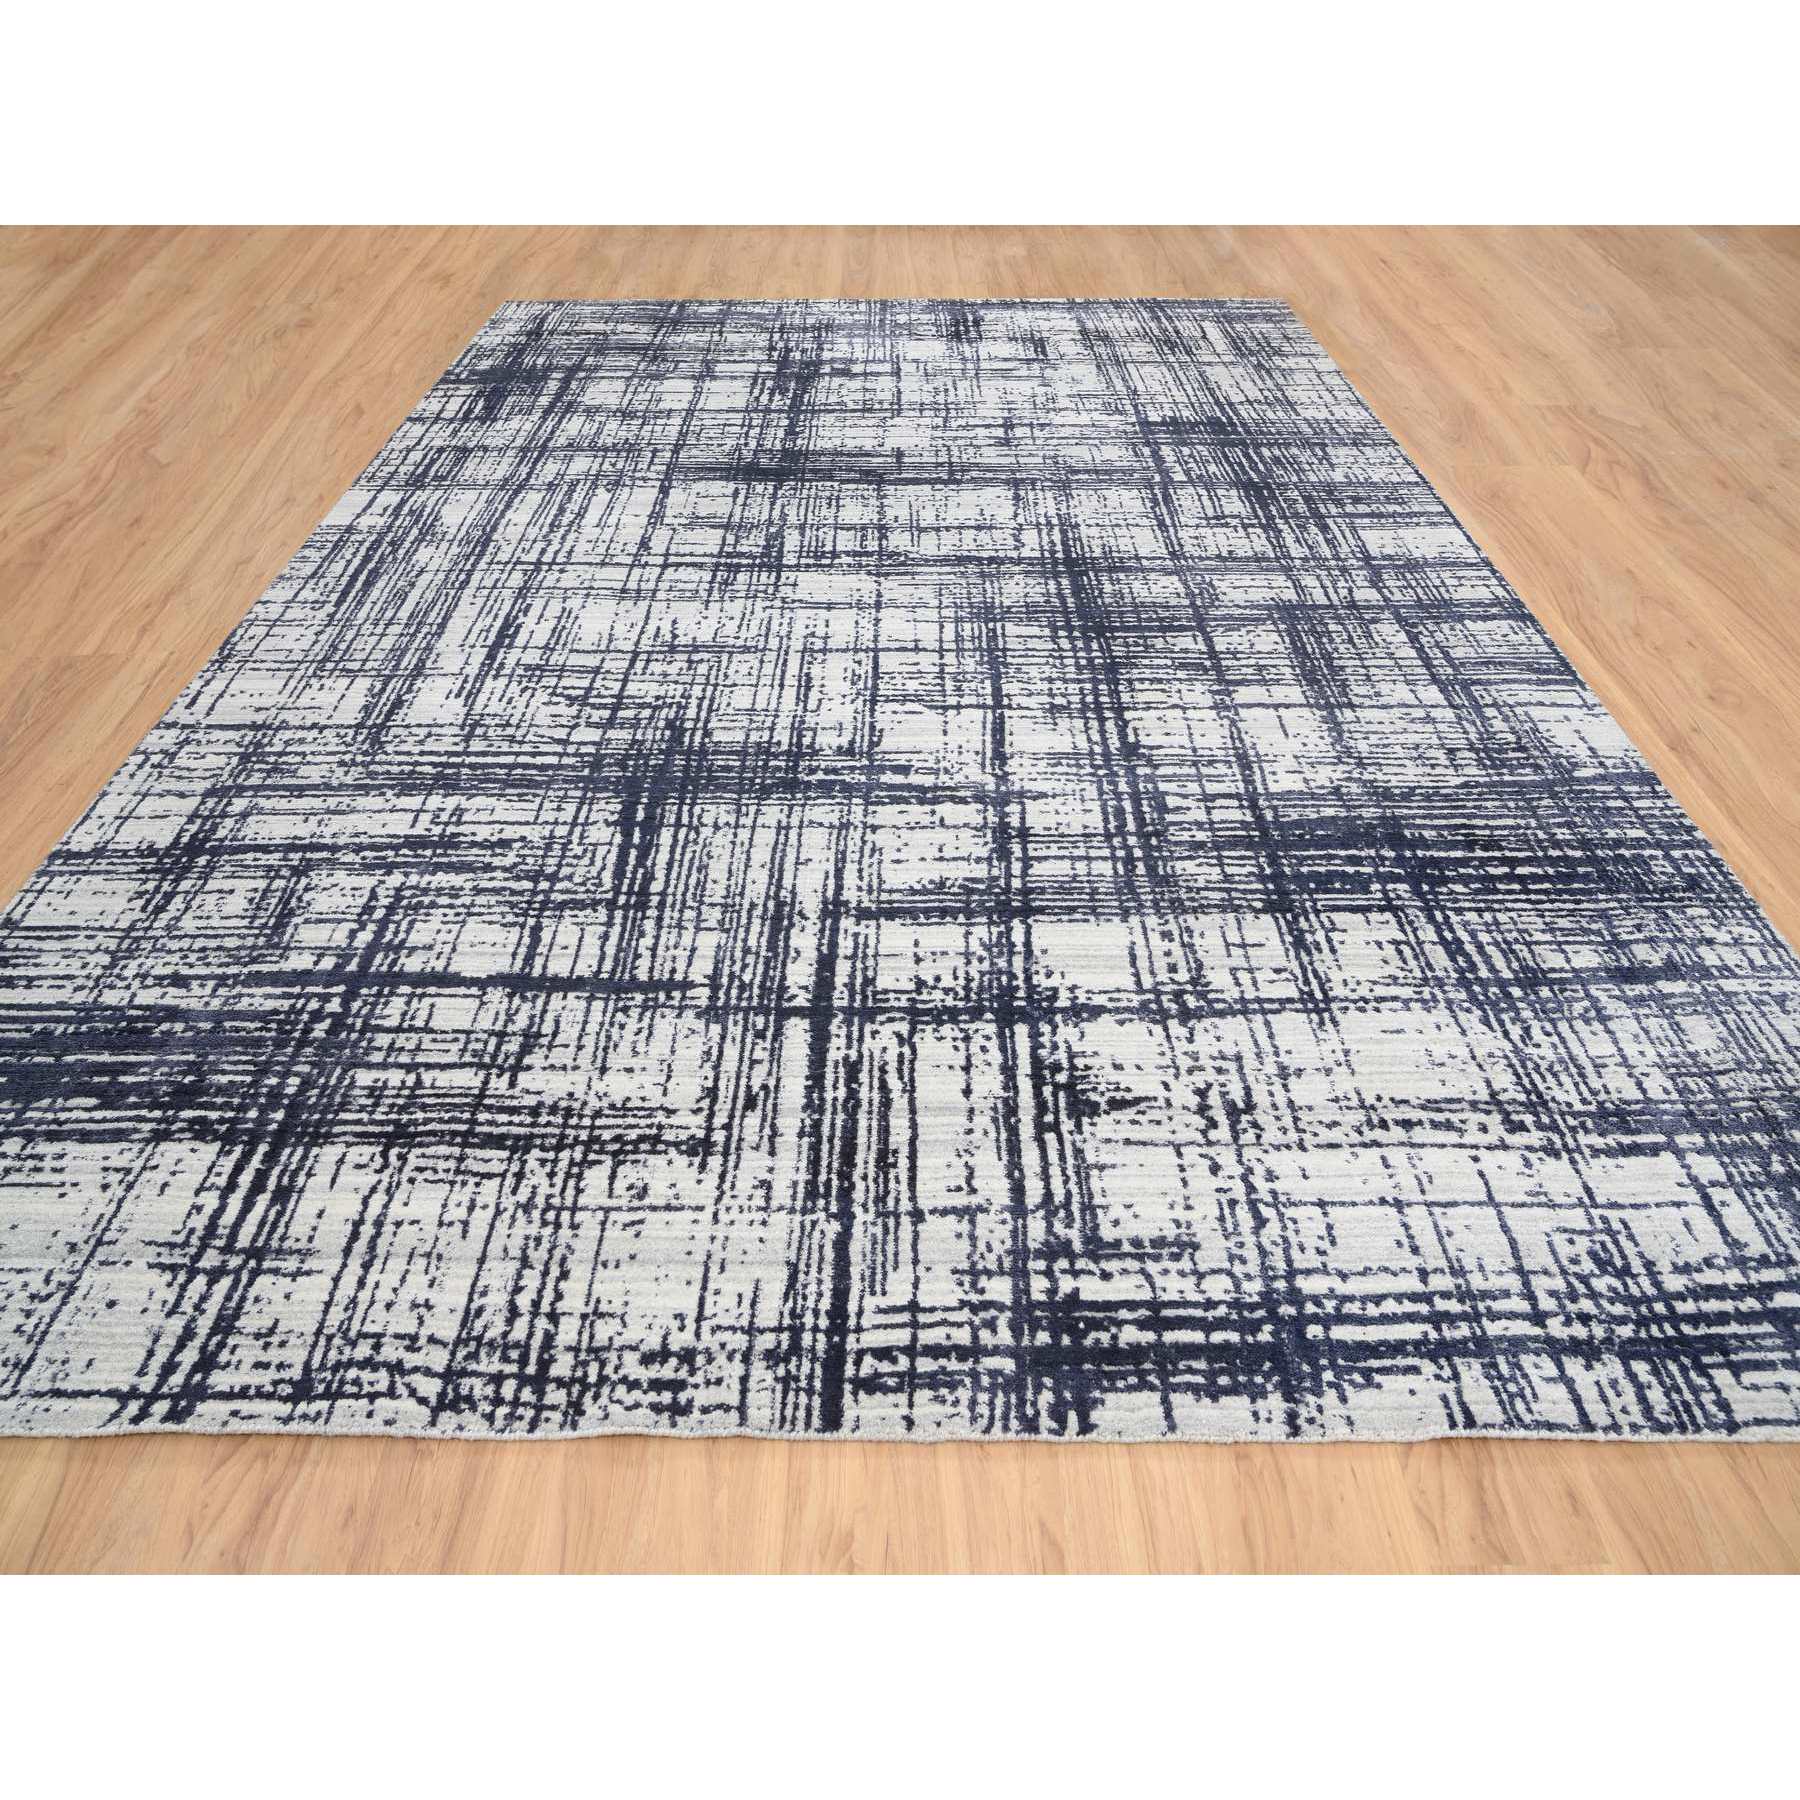 10'x13'9" Charcoal Black, Modern Erased Lines Design, Wool and Plant Based Silk Hand Loomed, Oriental Rug 